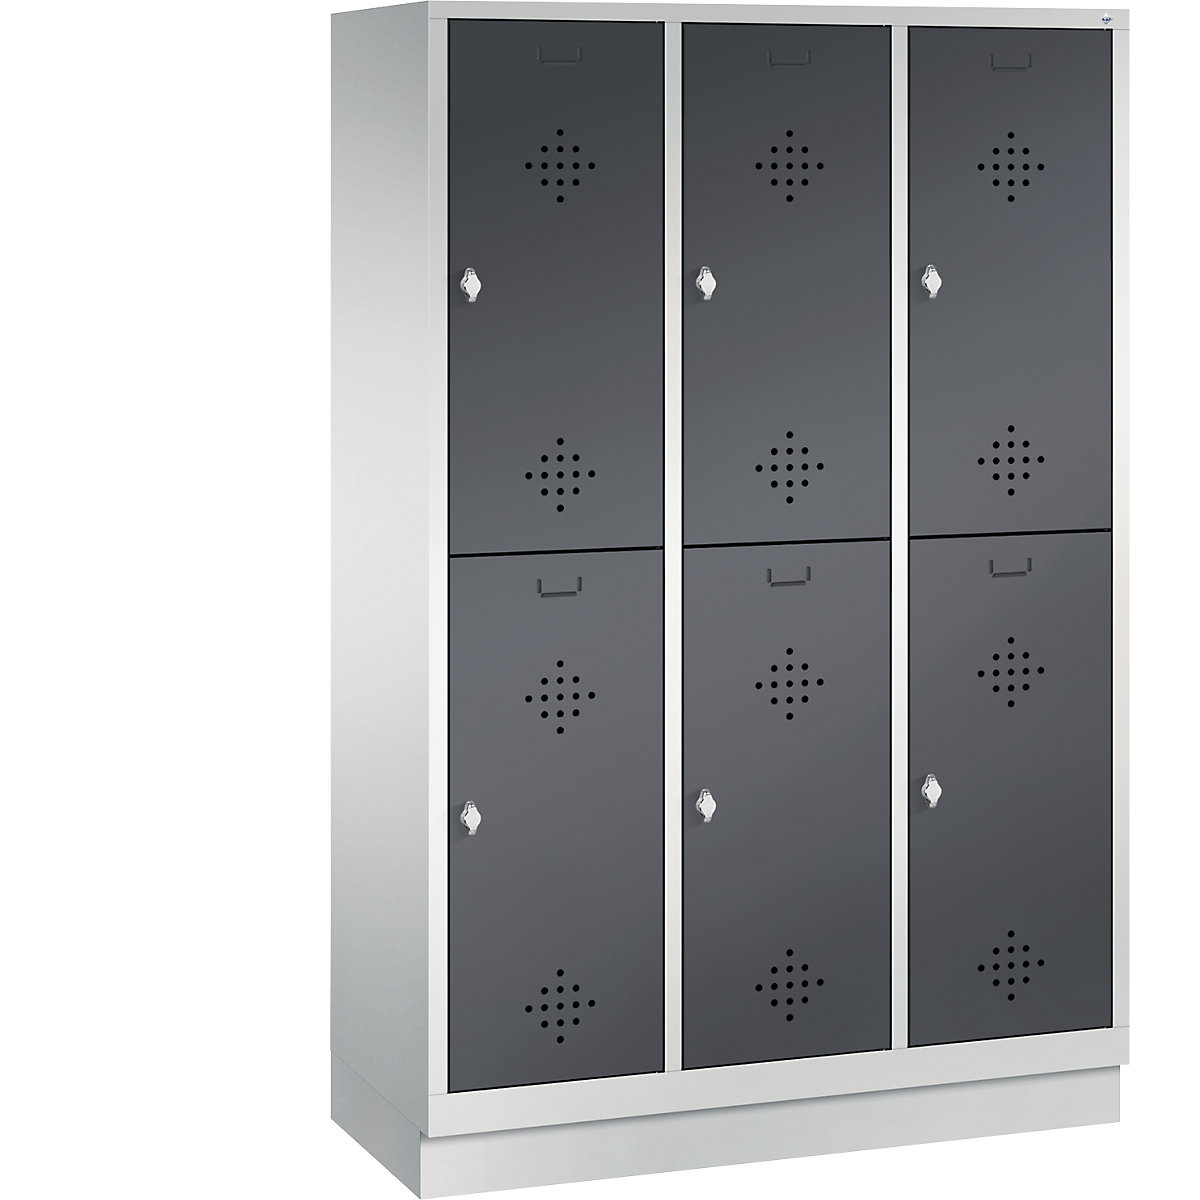 CLASSIC cloakroom locker with plinth, double tier – C+P, 3 compartments, 2 shelf compartments each, compartment width 400 mm, light grey / black grey-4